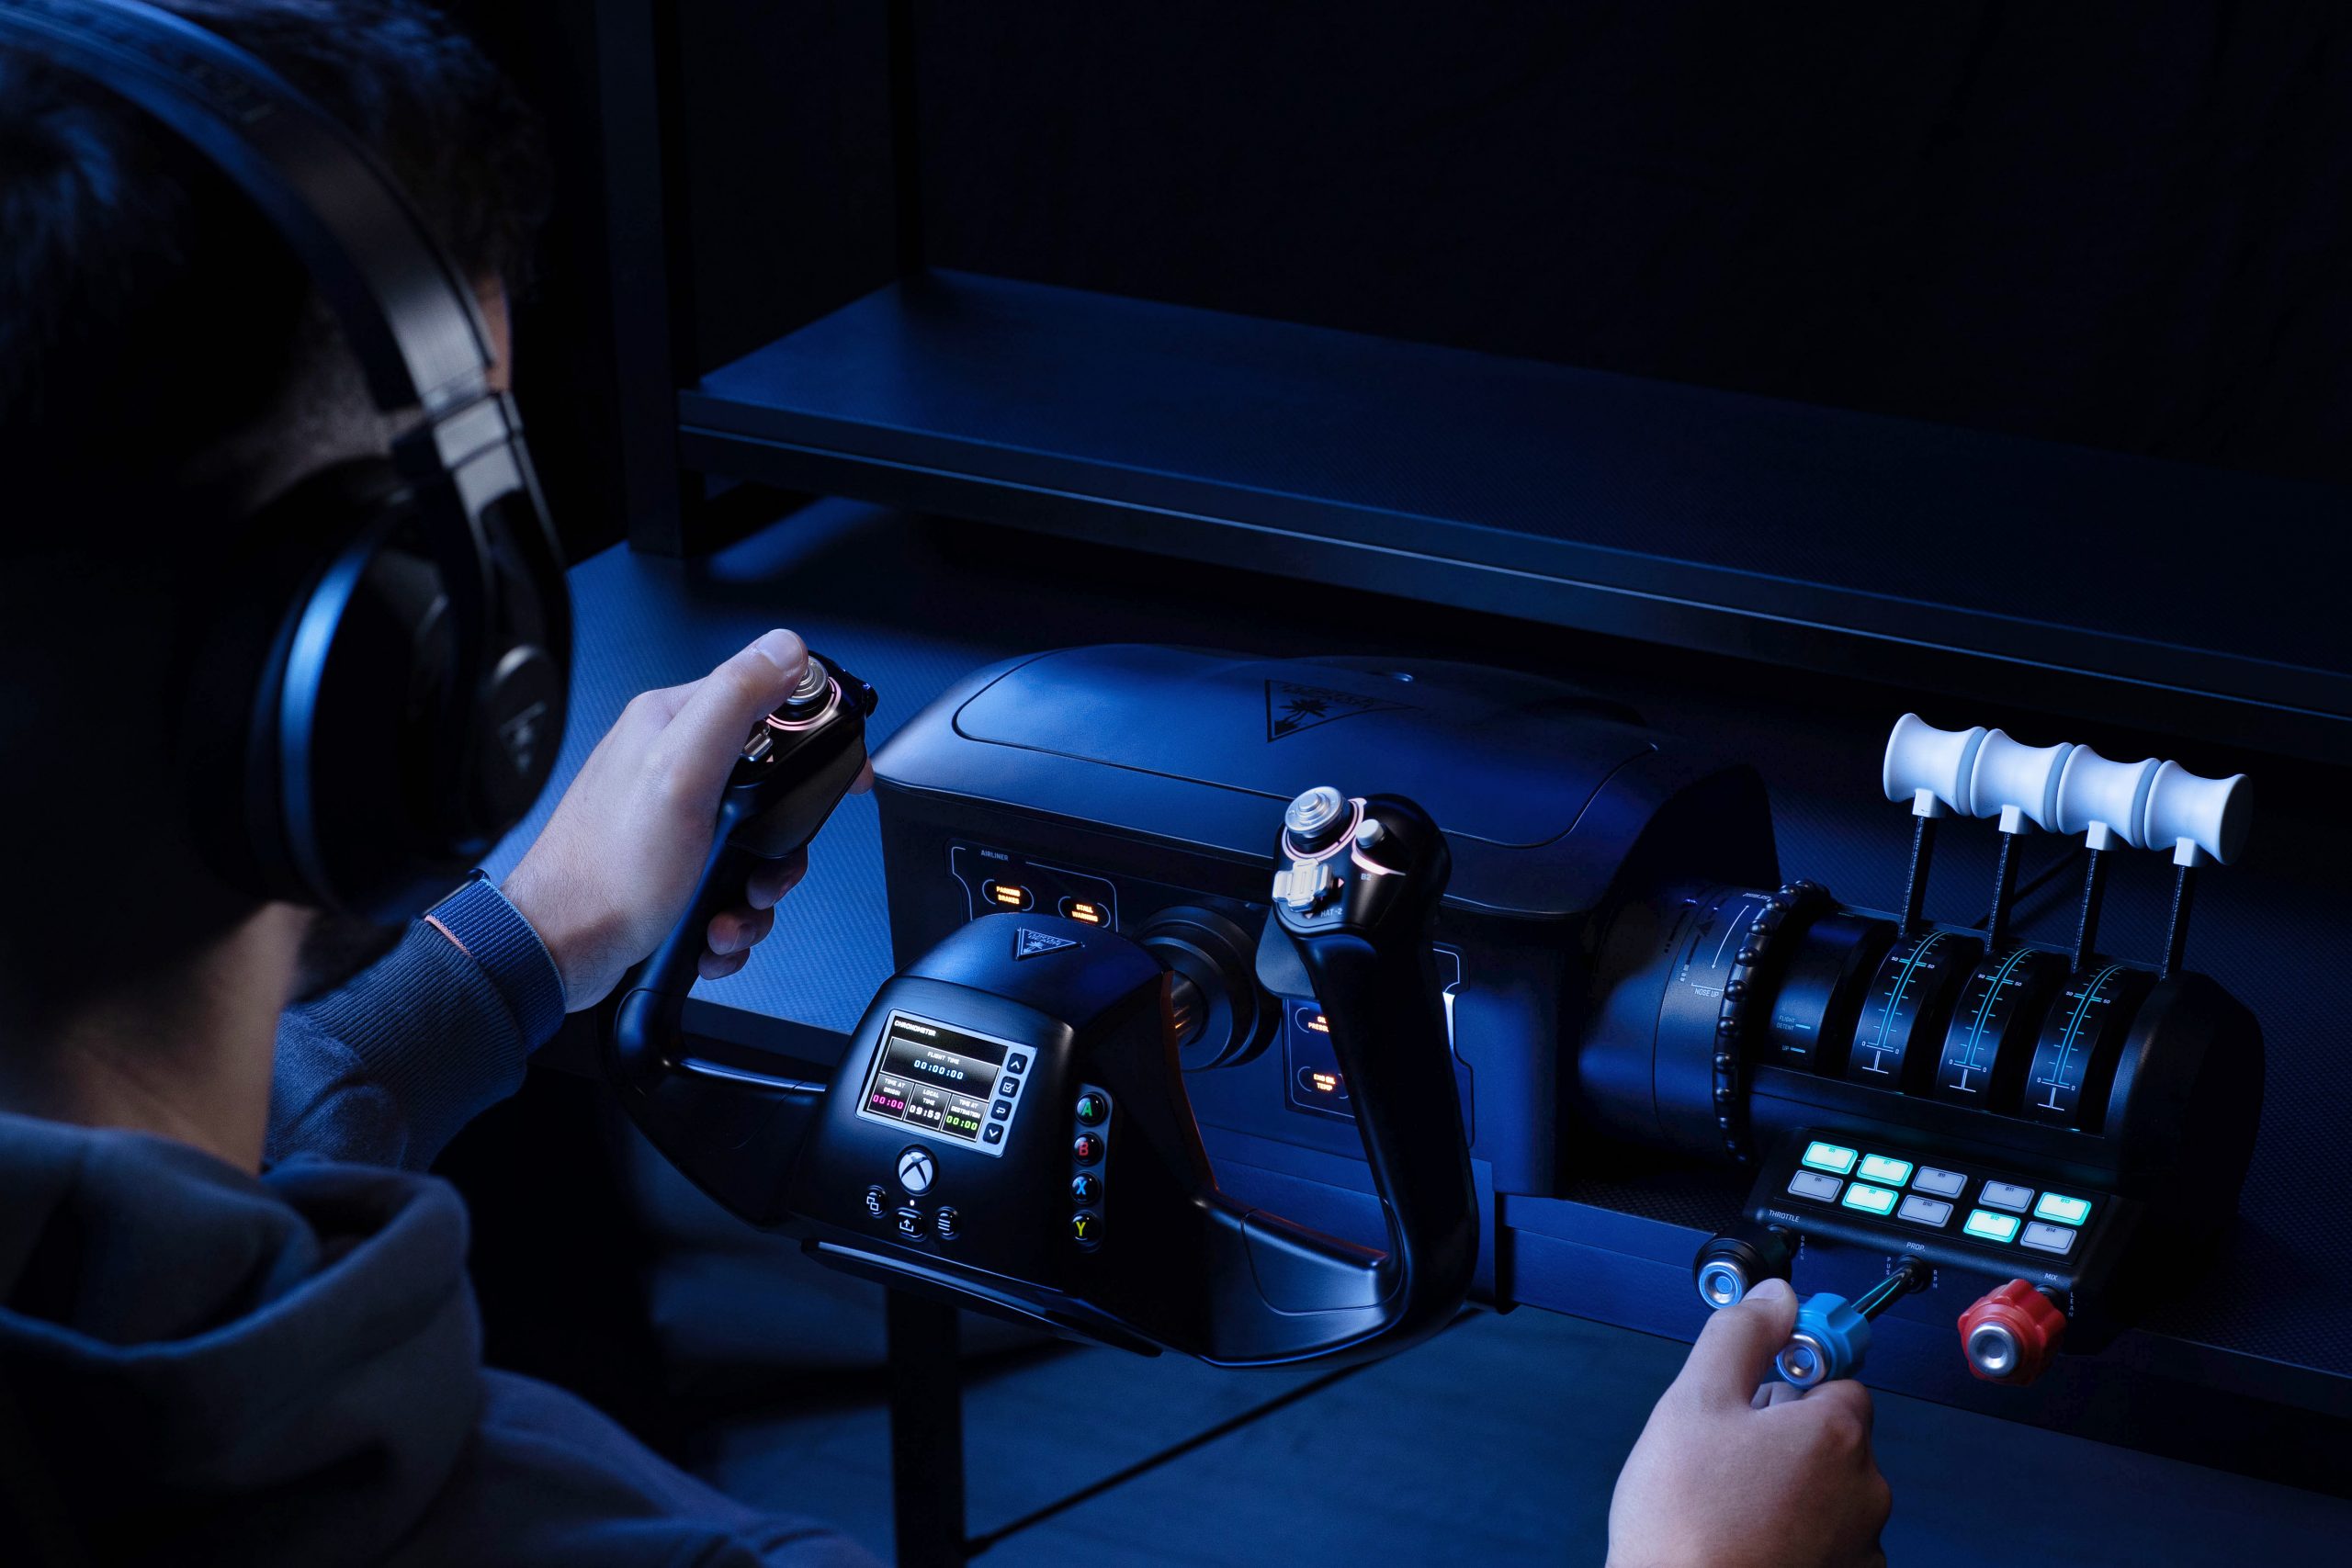 Turtle Beach’s VelocityOne Flight Simulation Control System Sell Out in Minutes